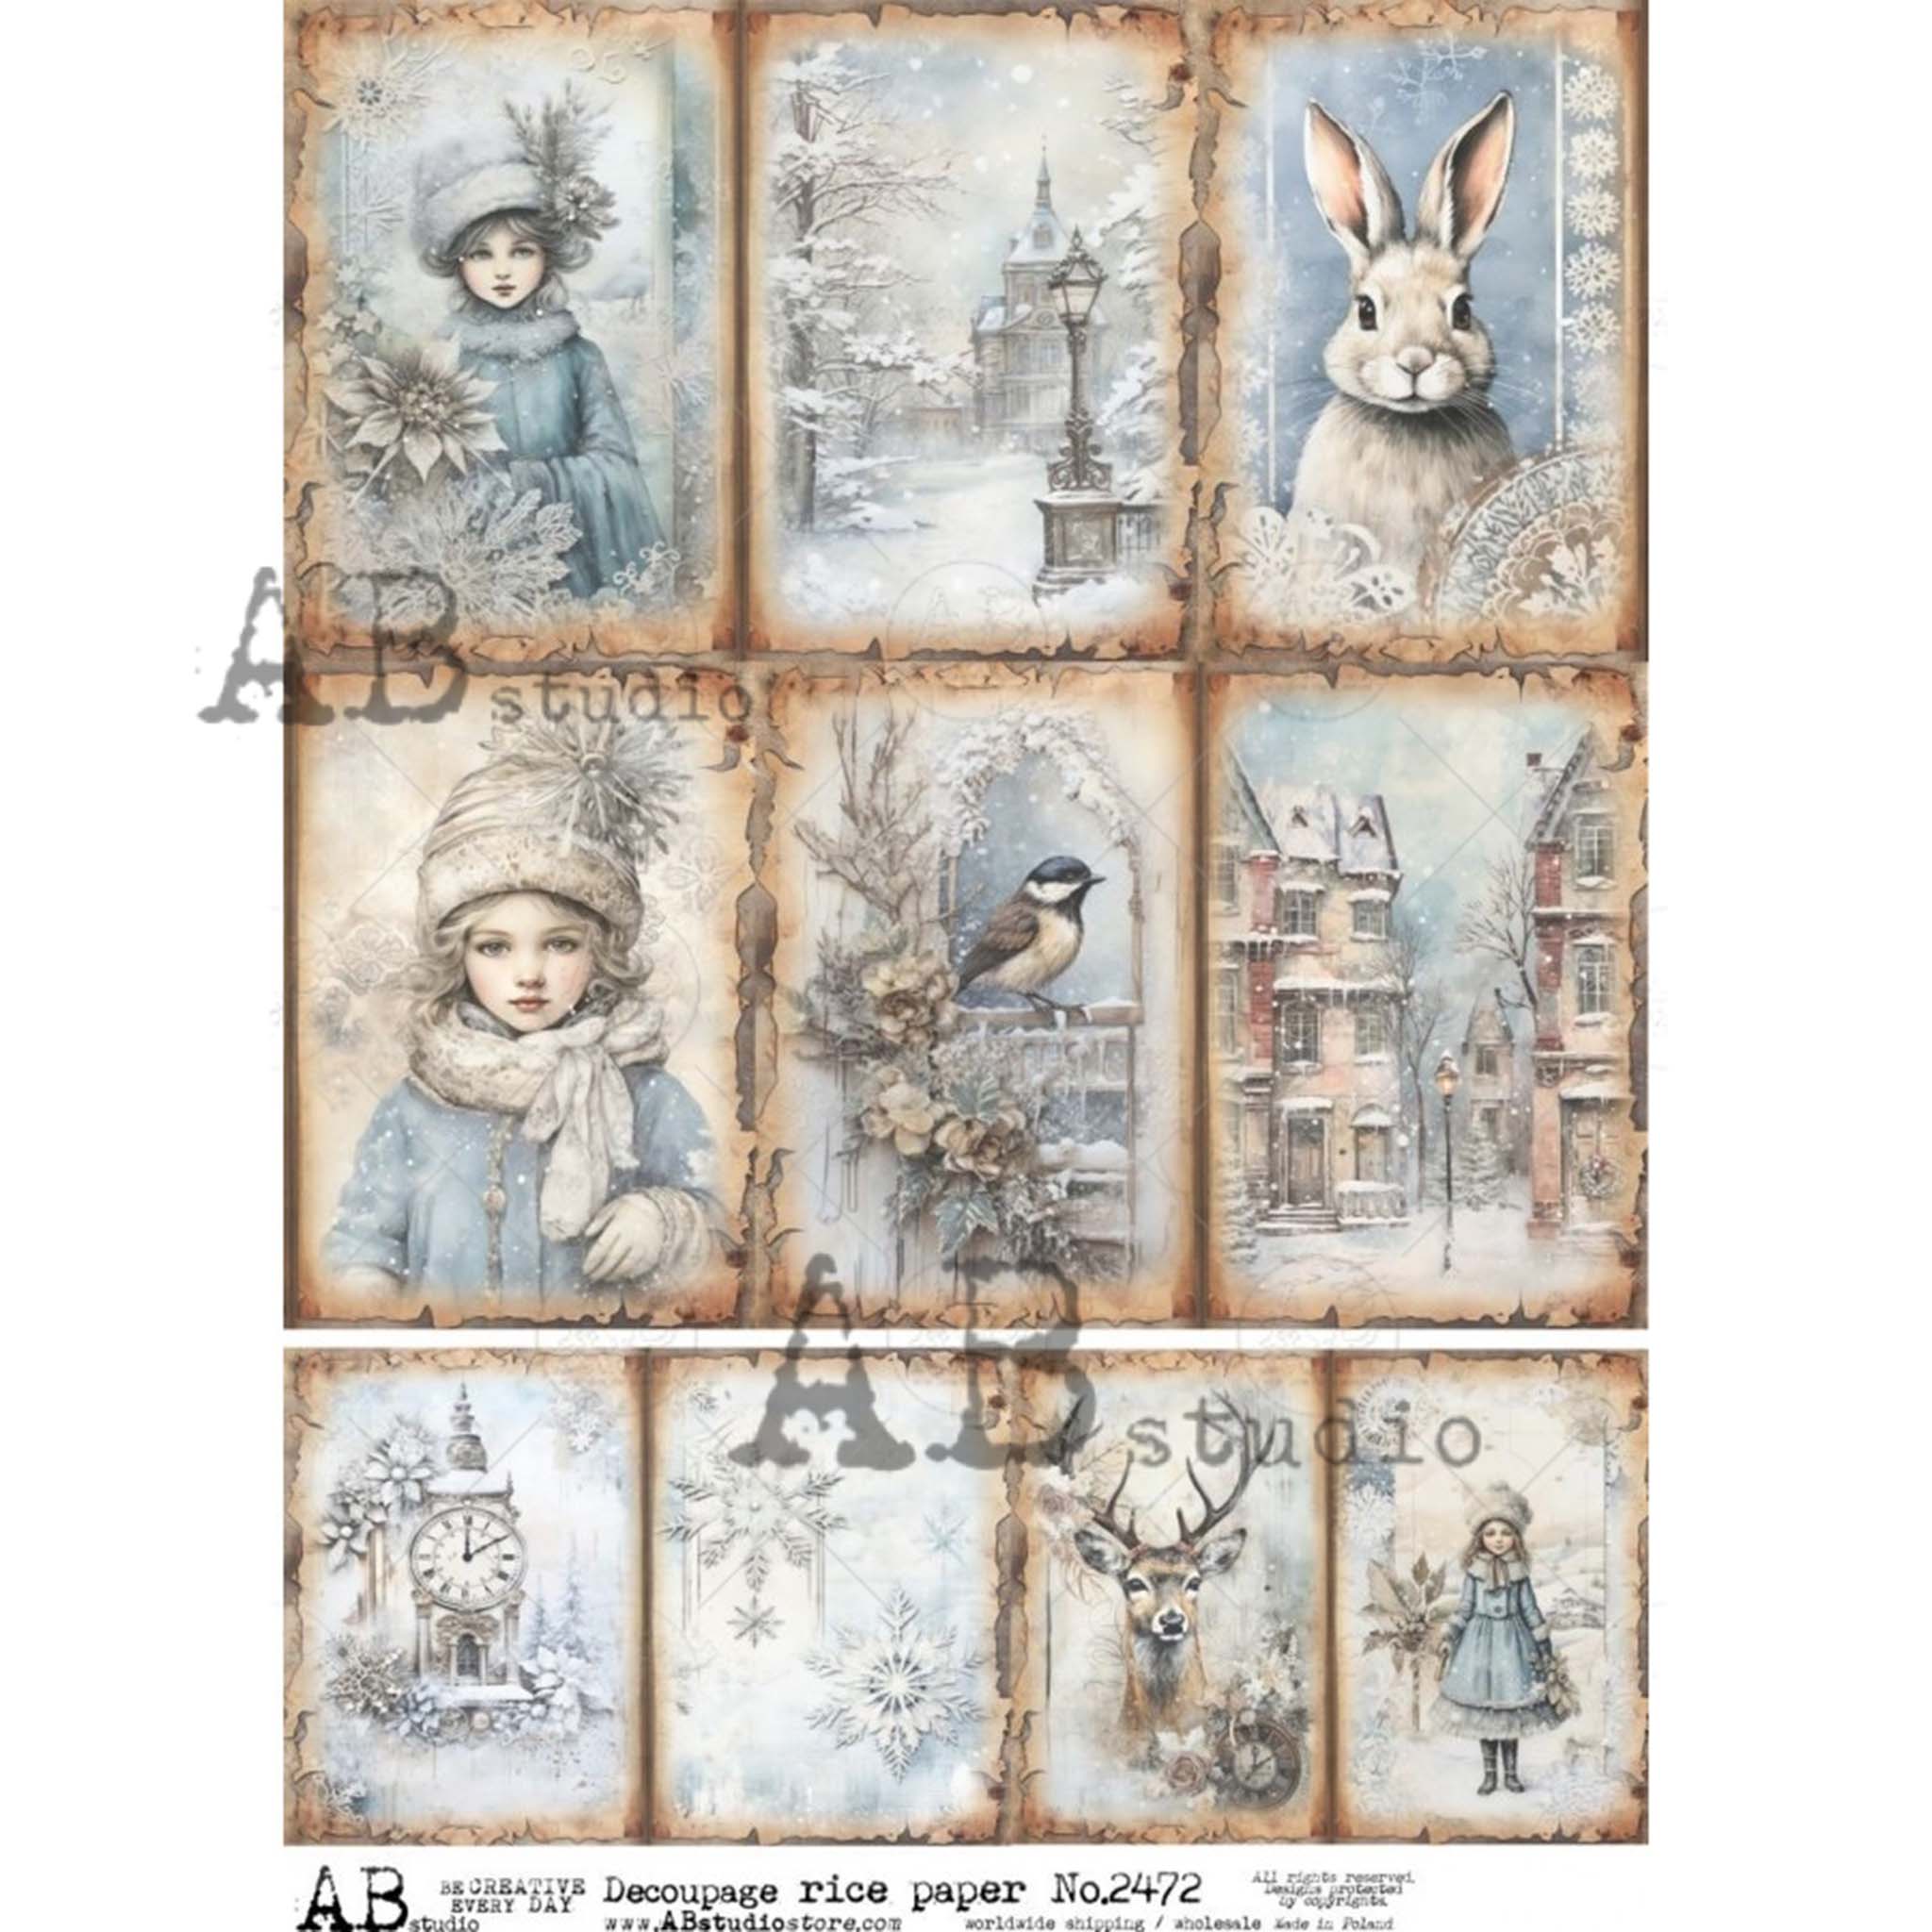 An A4 rice paper of 10 unique designs featuring three girls out in the snow, two small town scenes, a rabbit, a deer, a bird on a windowsill, a flurry of snowflakes, and a majestic clock tower is against a white background.